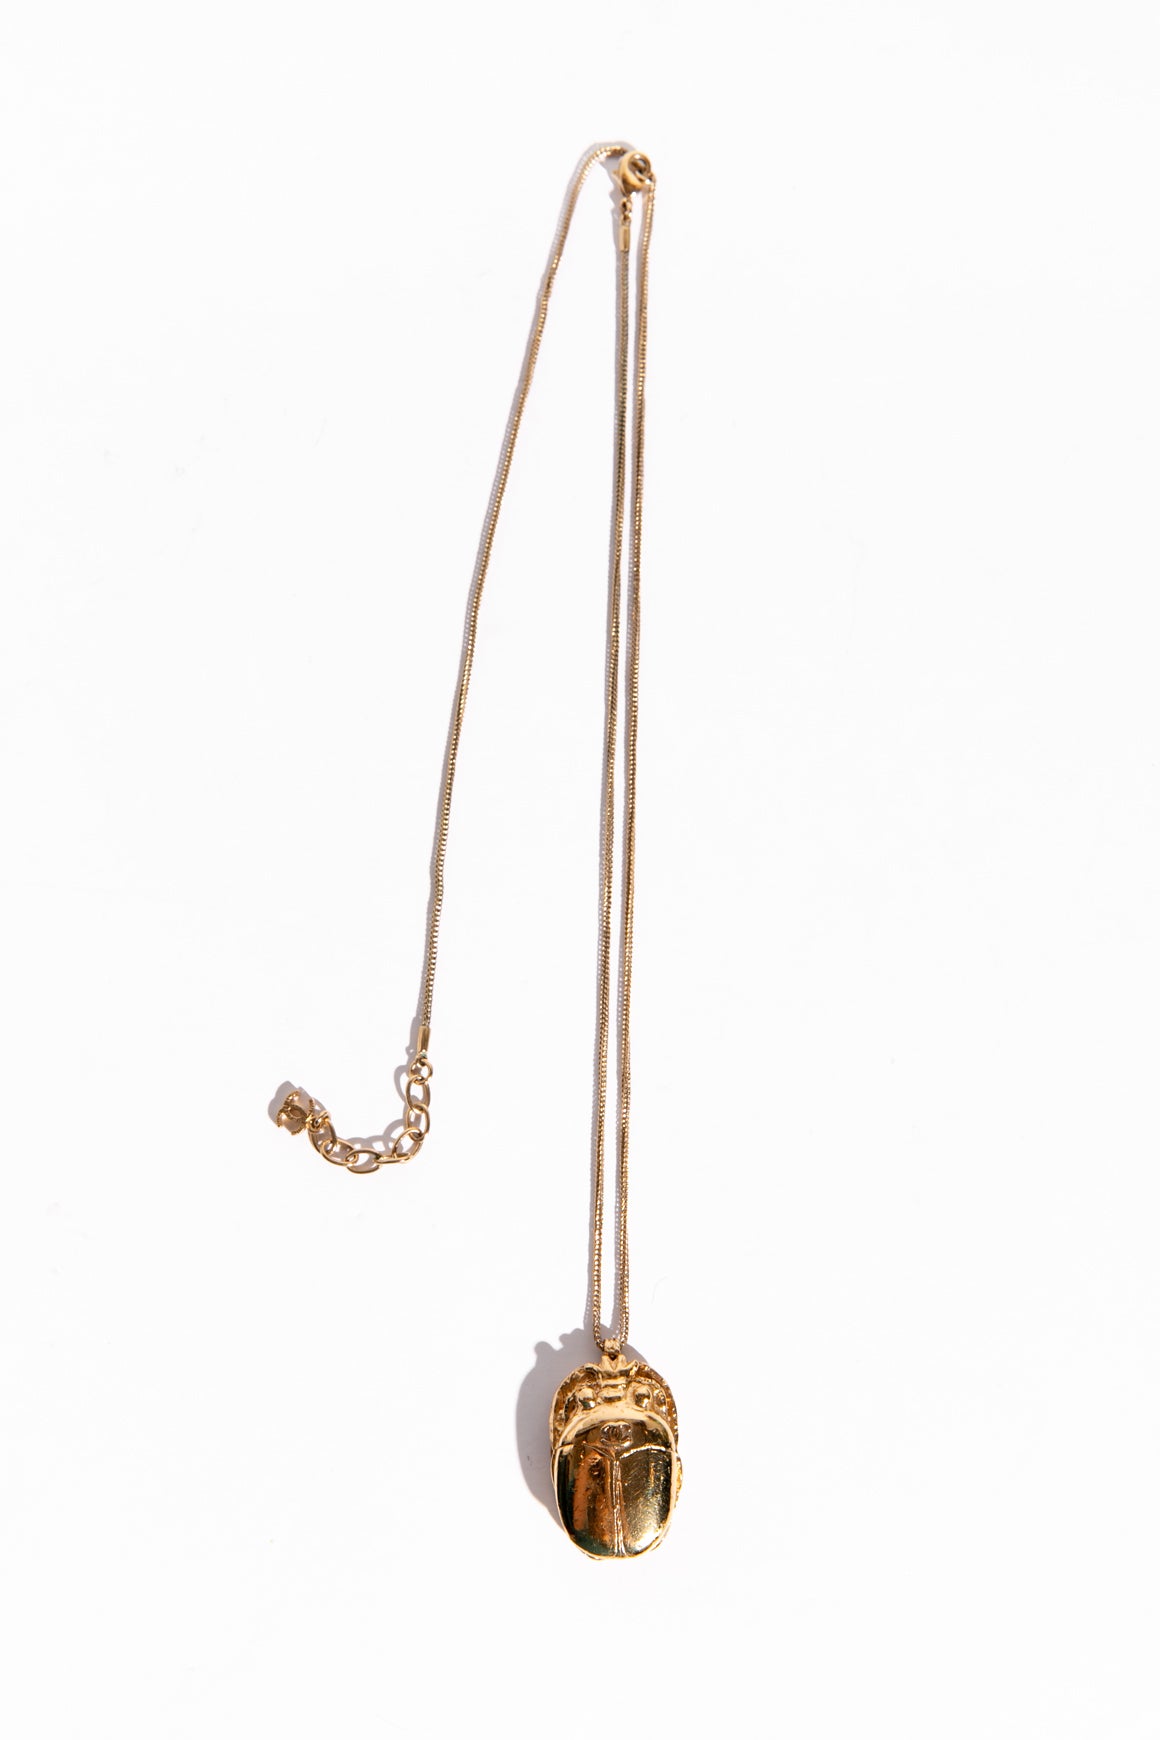 CHANEL Scarab Necklace